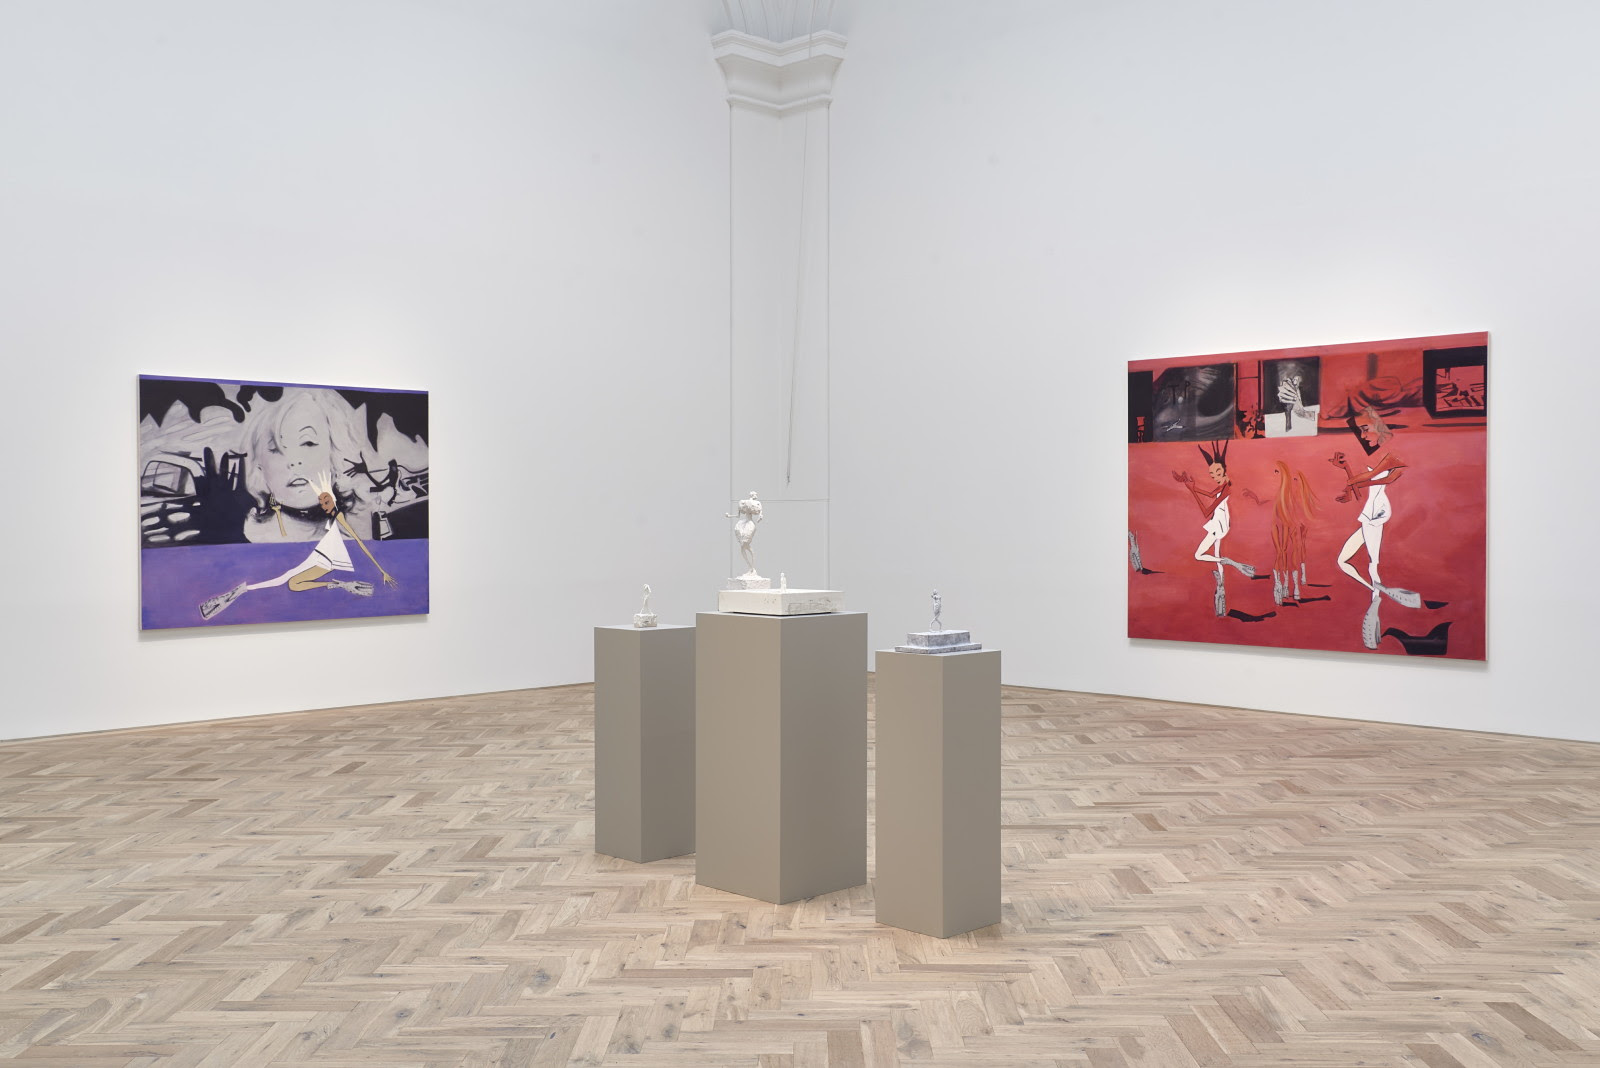 Gallery view with white wall and wooden floor. In the middle of the room on three brown plinth there are three white-ash sculptures. Hung at the walls are two big canvases